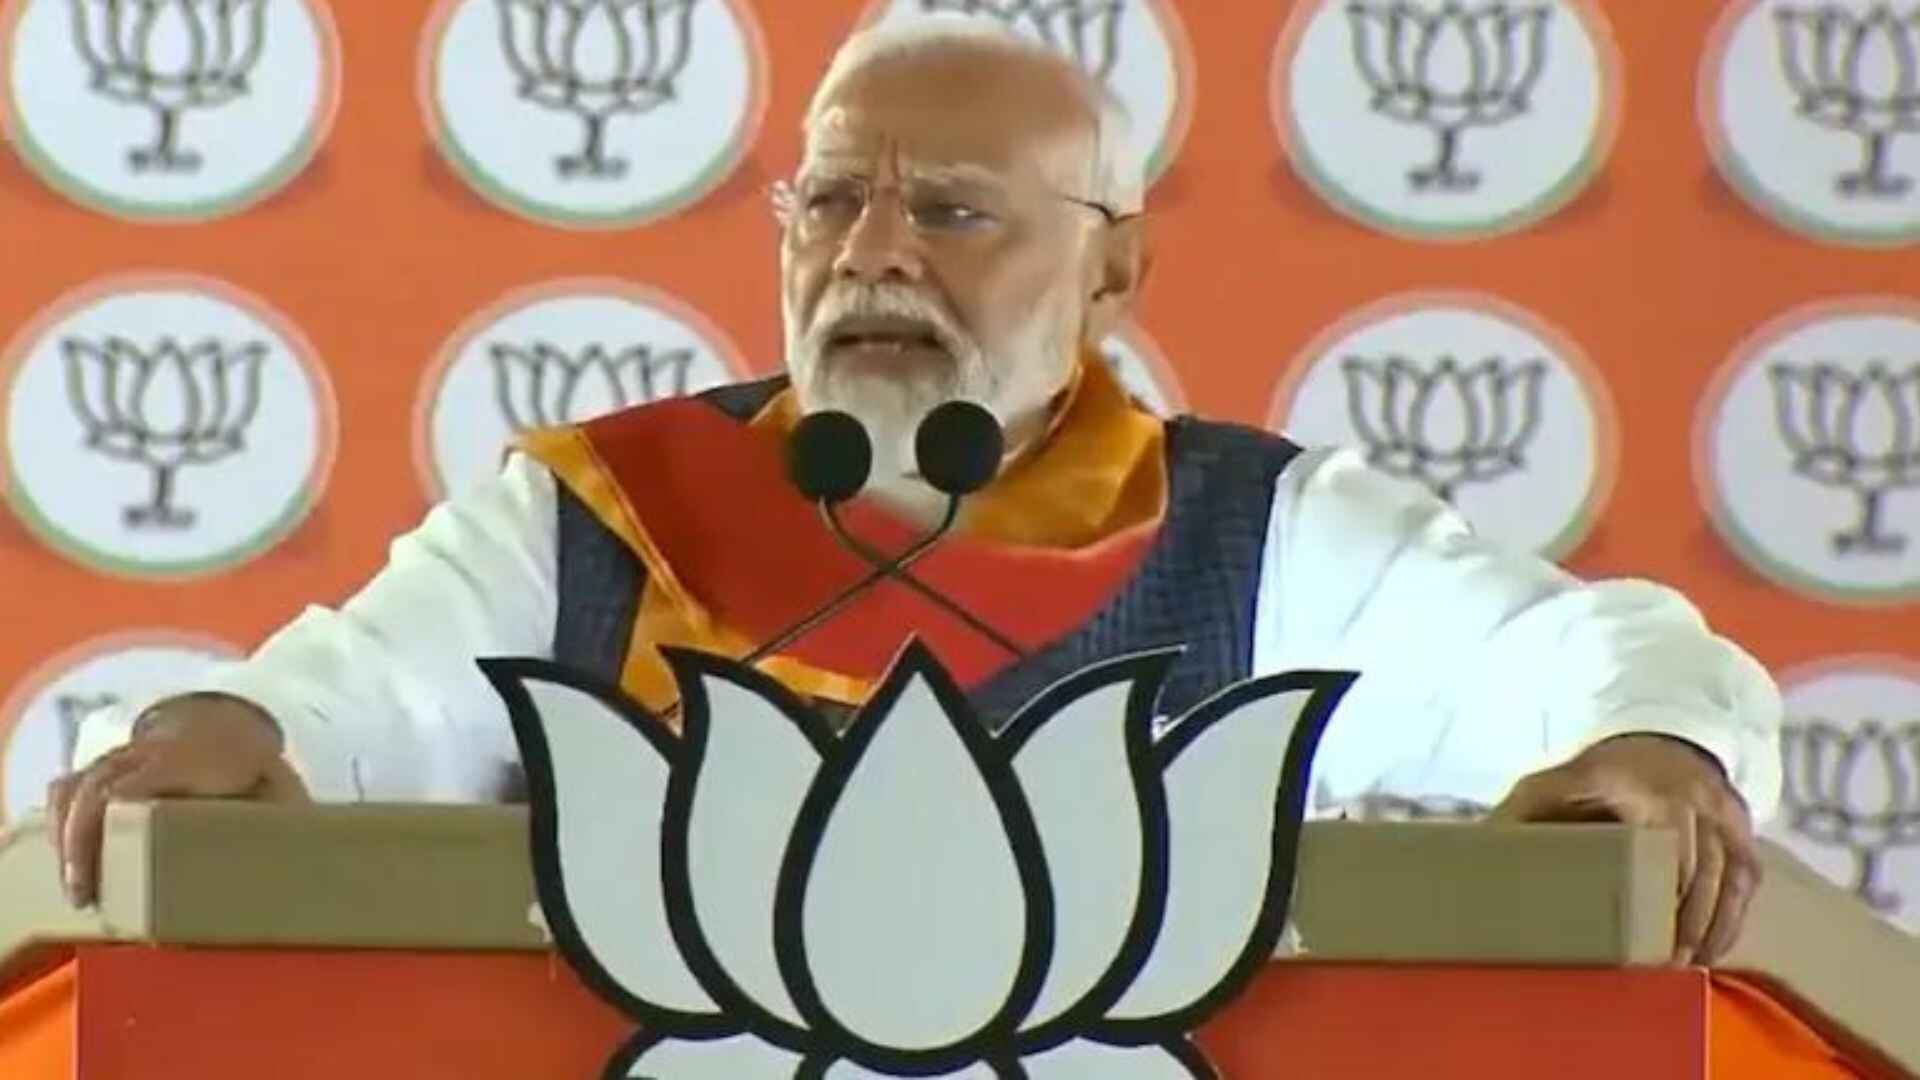 Howrah Used to Be Industrial Hub But Now Factories Have Been Shut Down: PM Modi